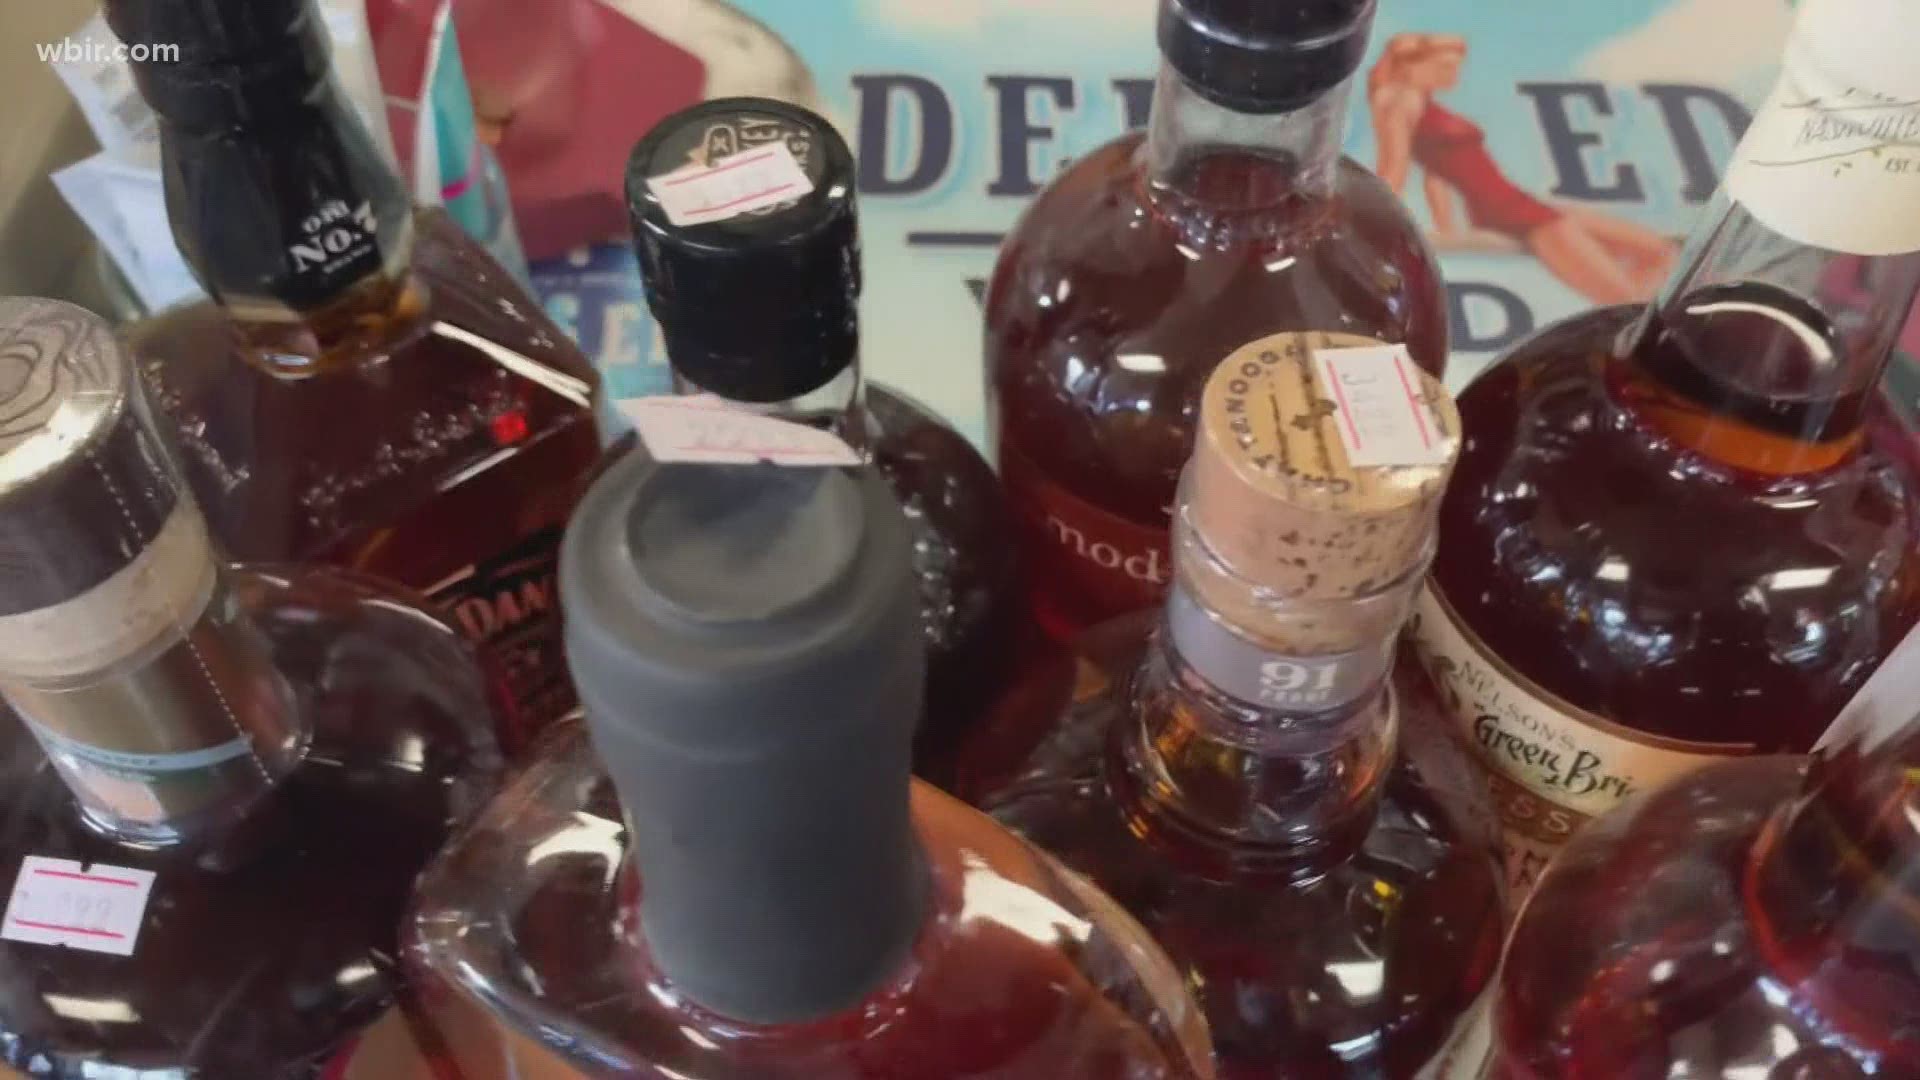 10News reporter Shannon Smith spoke with researchers about the whiskey making process.